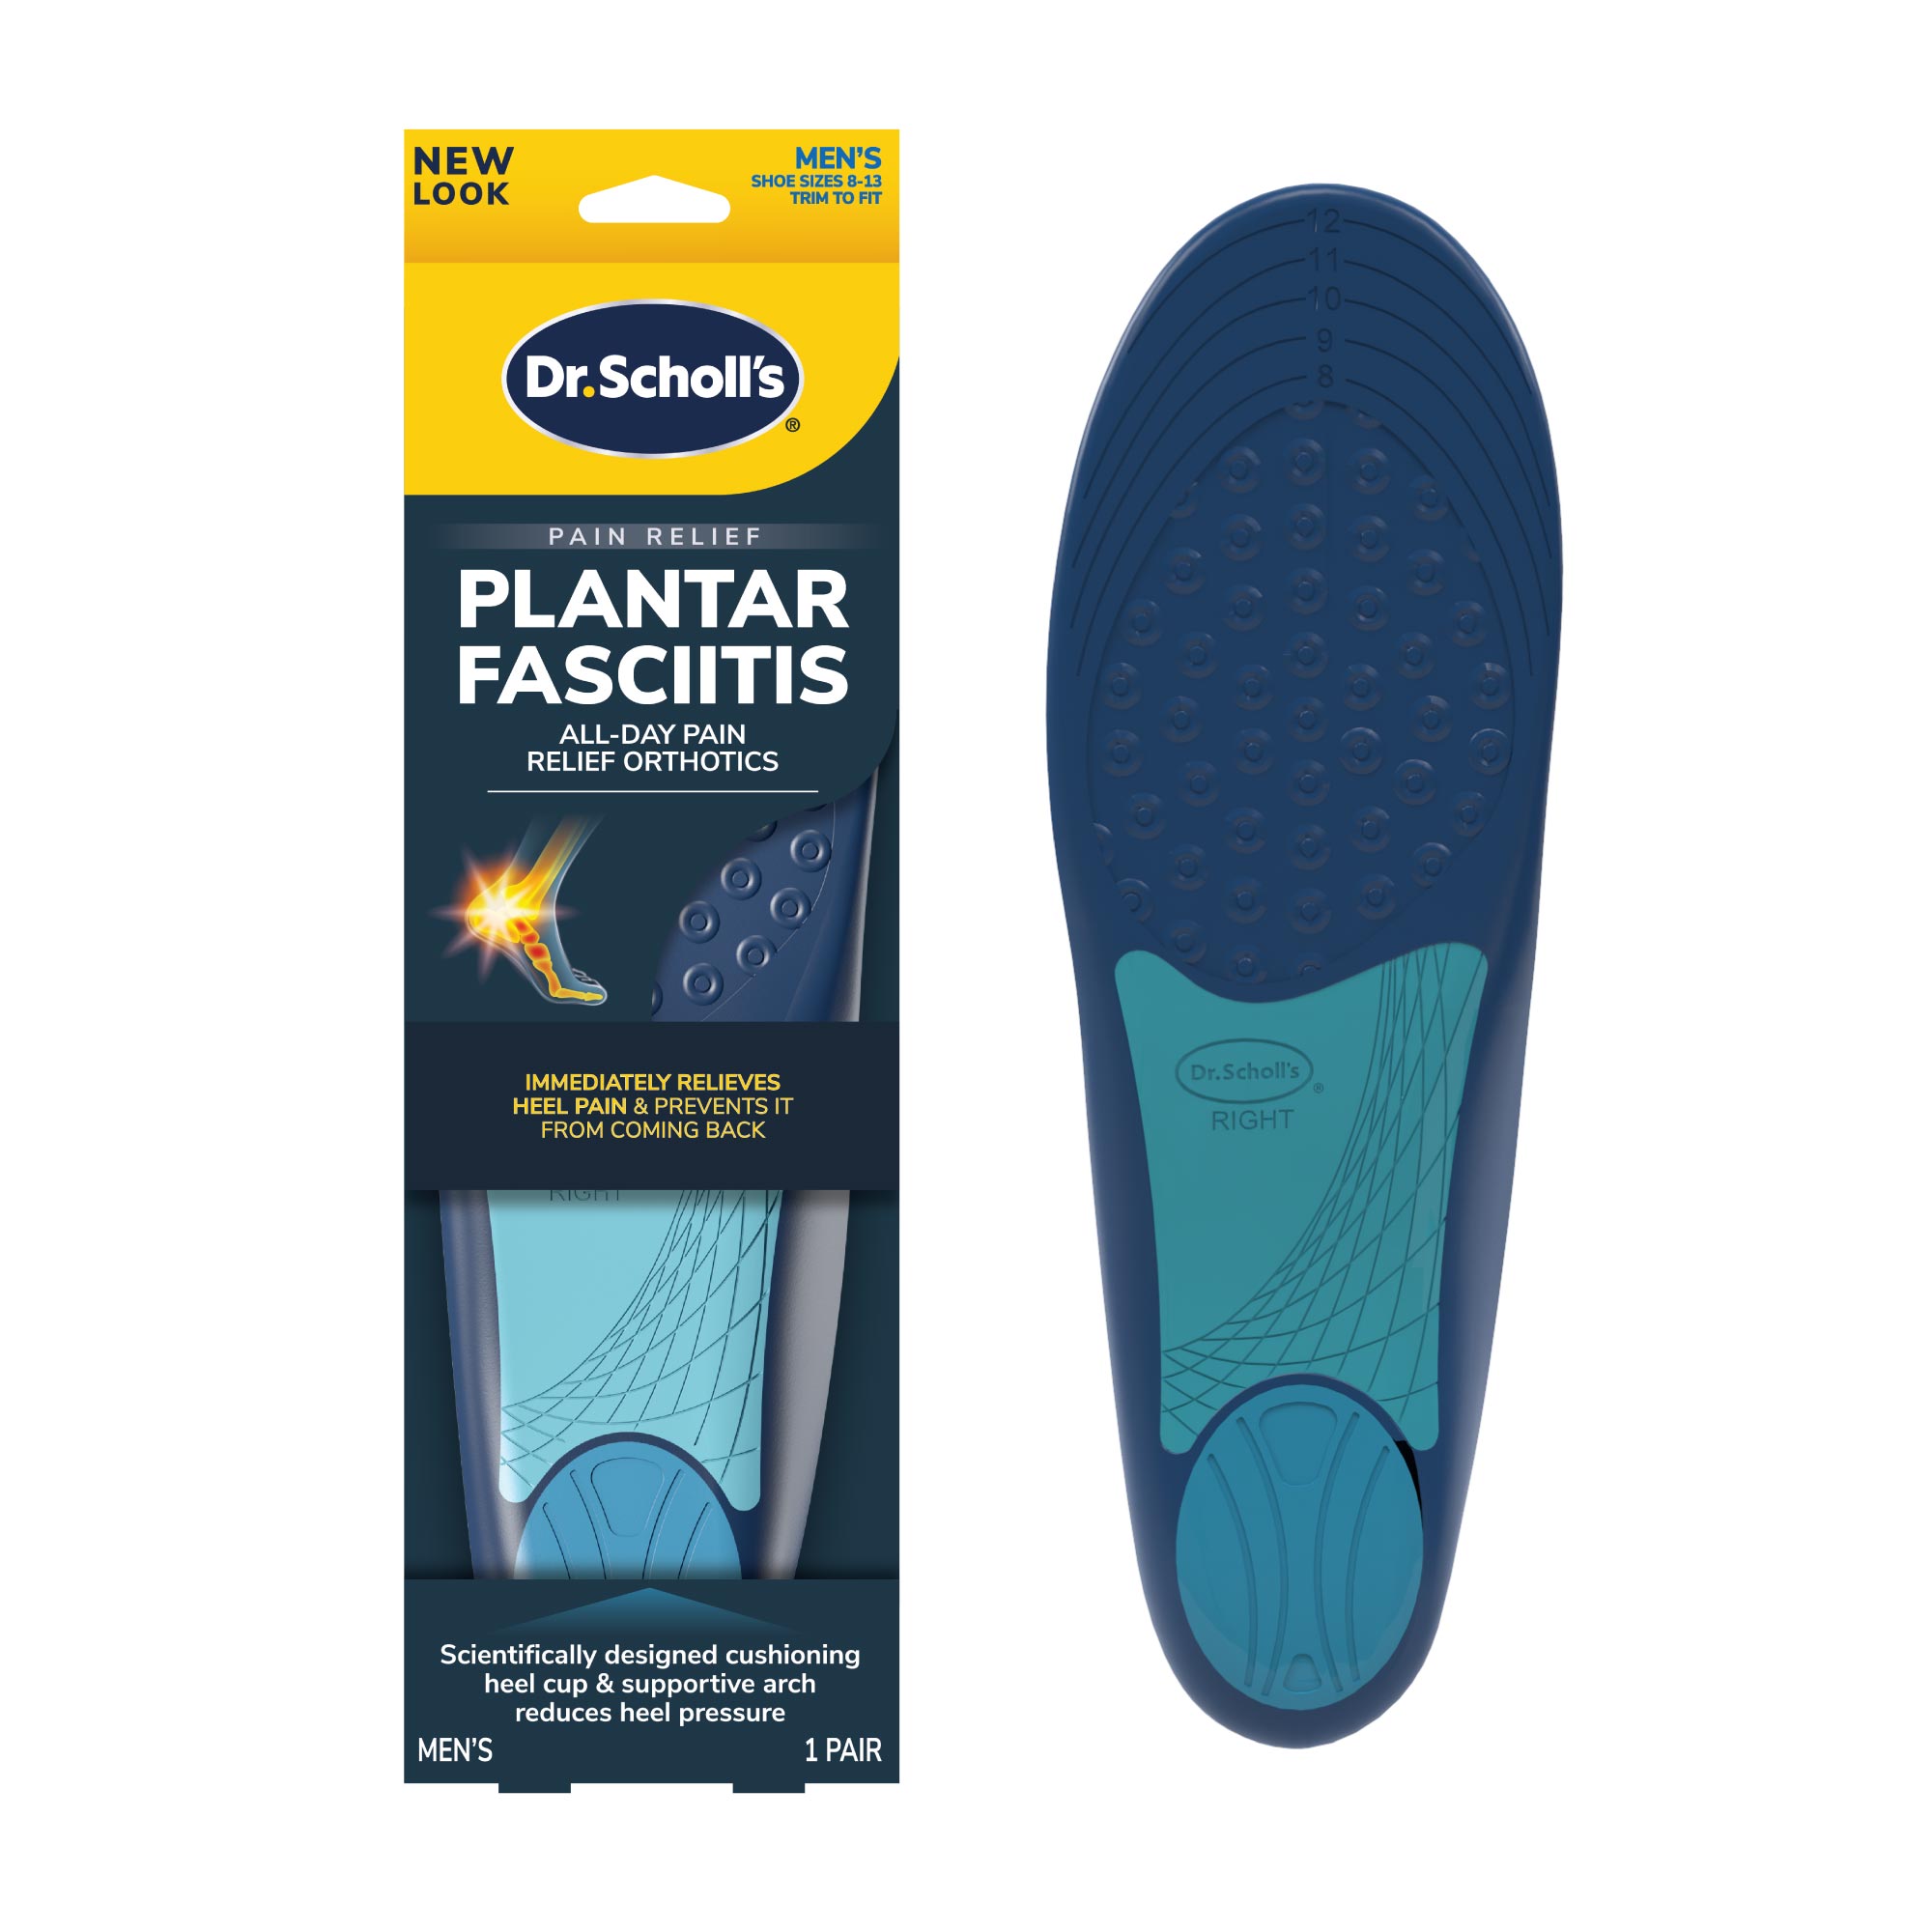 Foot Care Products - CVS Pharmacy